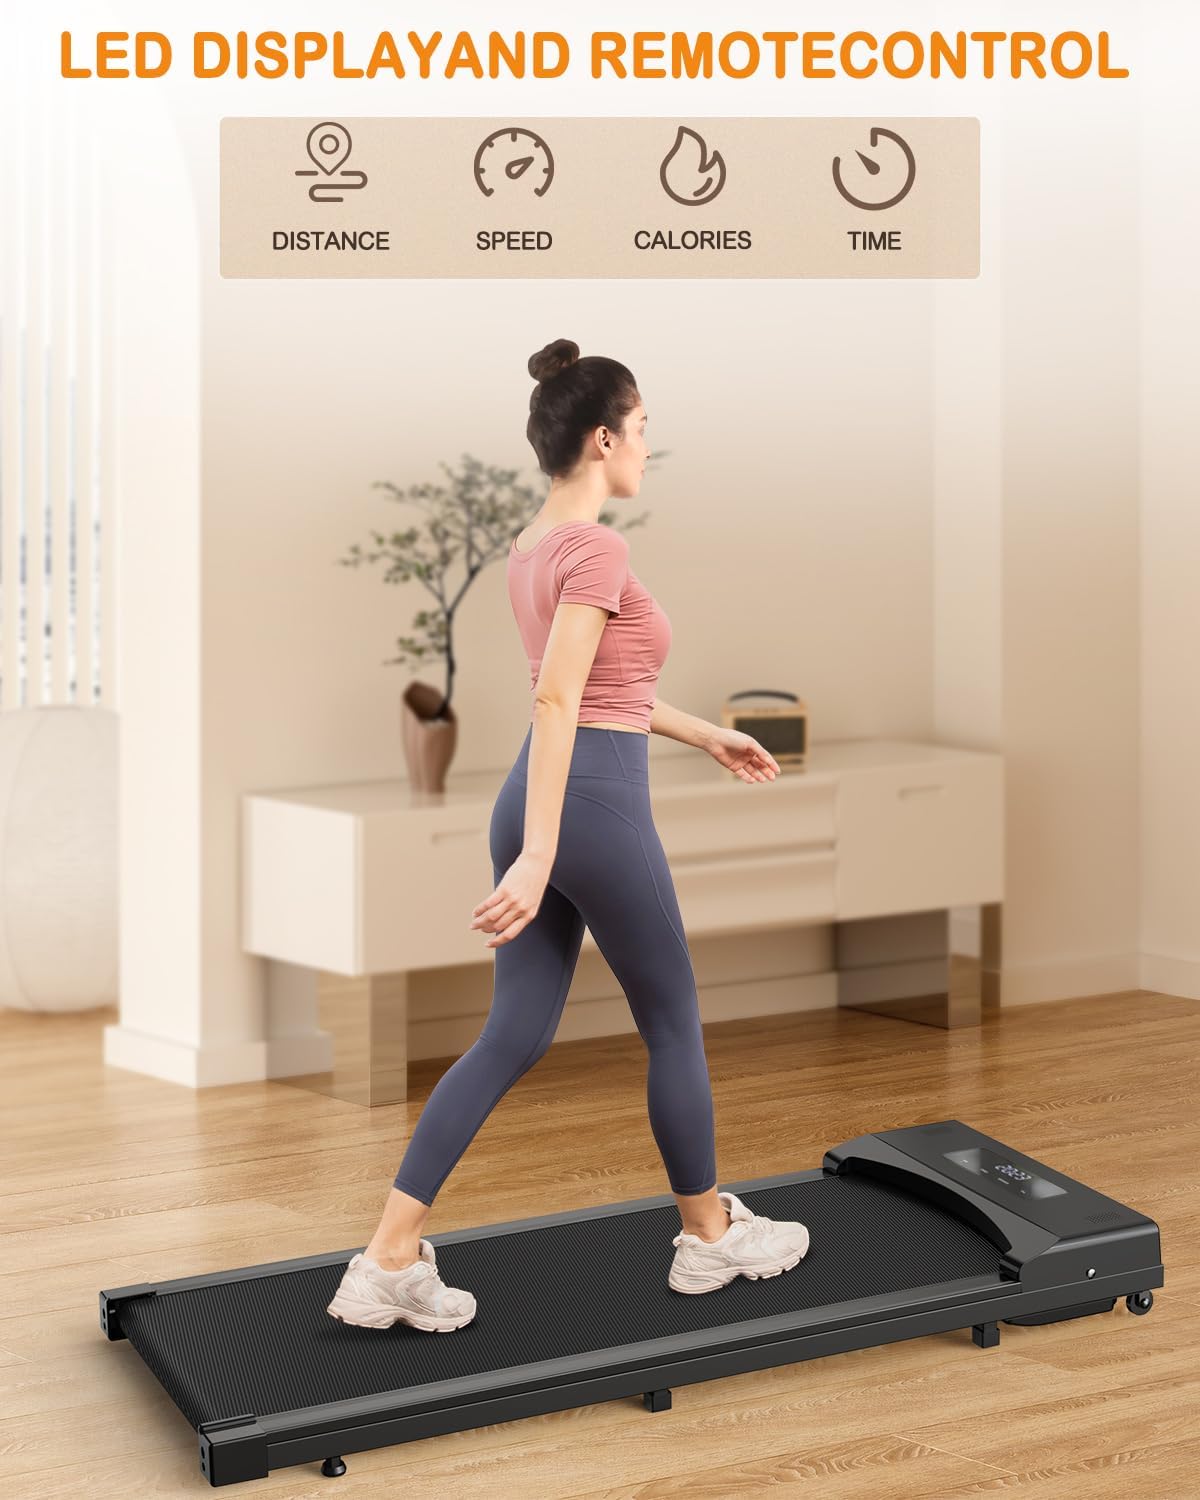 Walking Pad, Under Desk Treadmill, Walking Treadmill 2 in 1 for Home/Office with Remote Control, Portable Treadmill (Black, 1 Year Warranty)